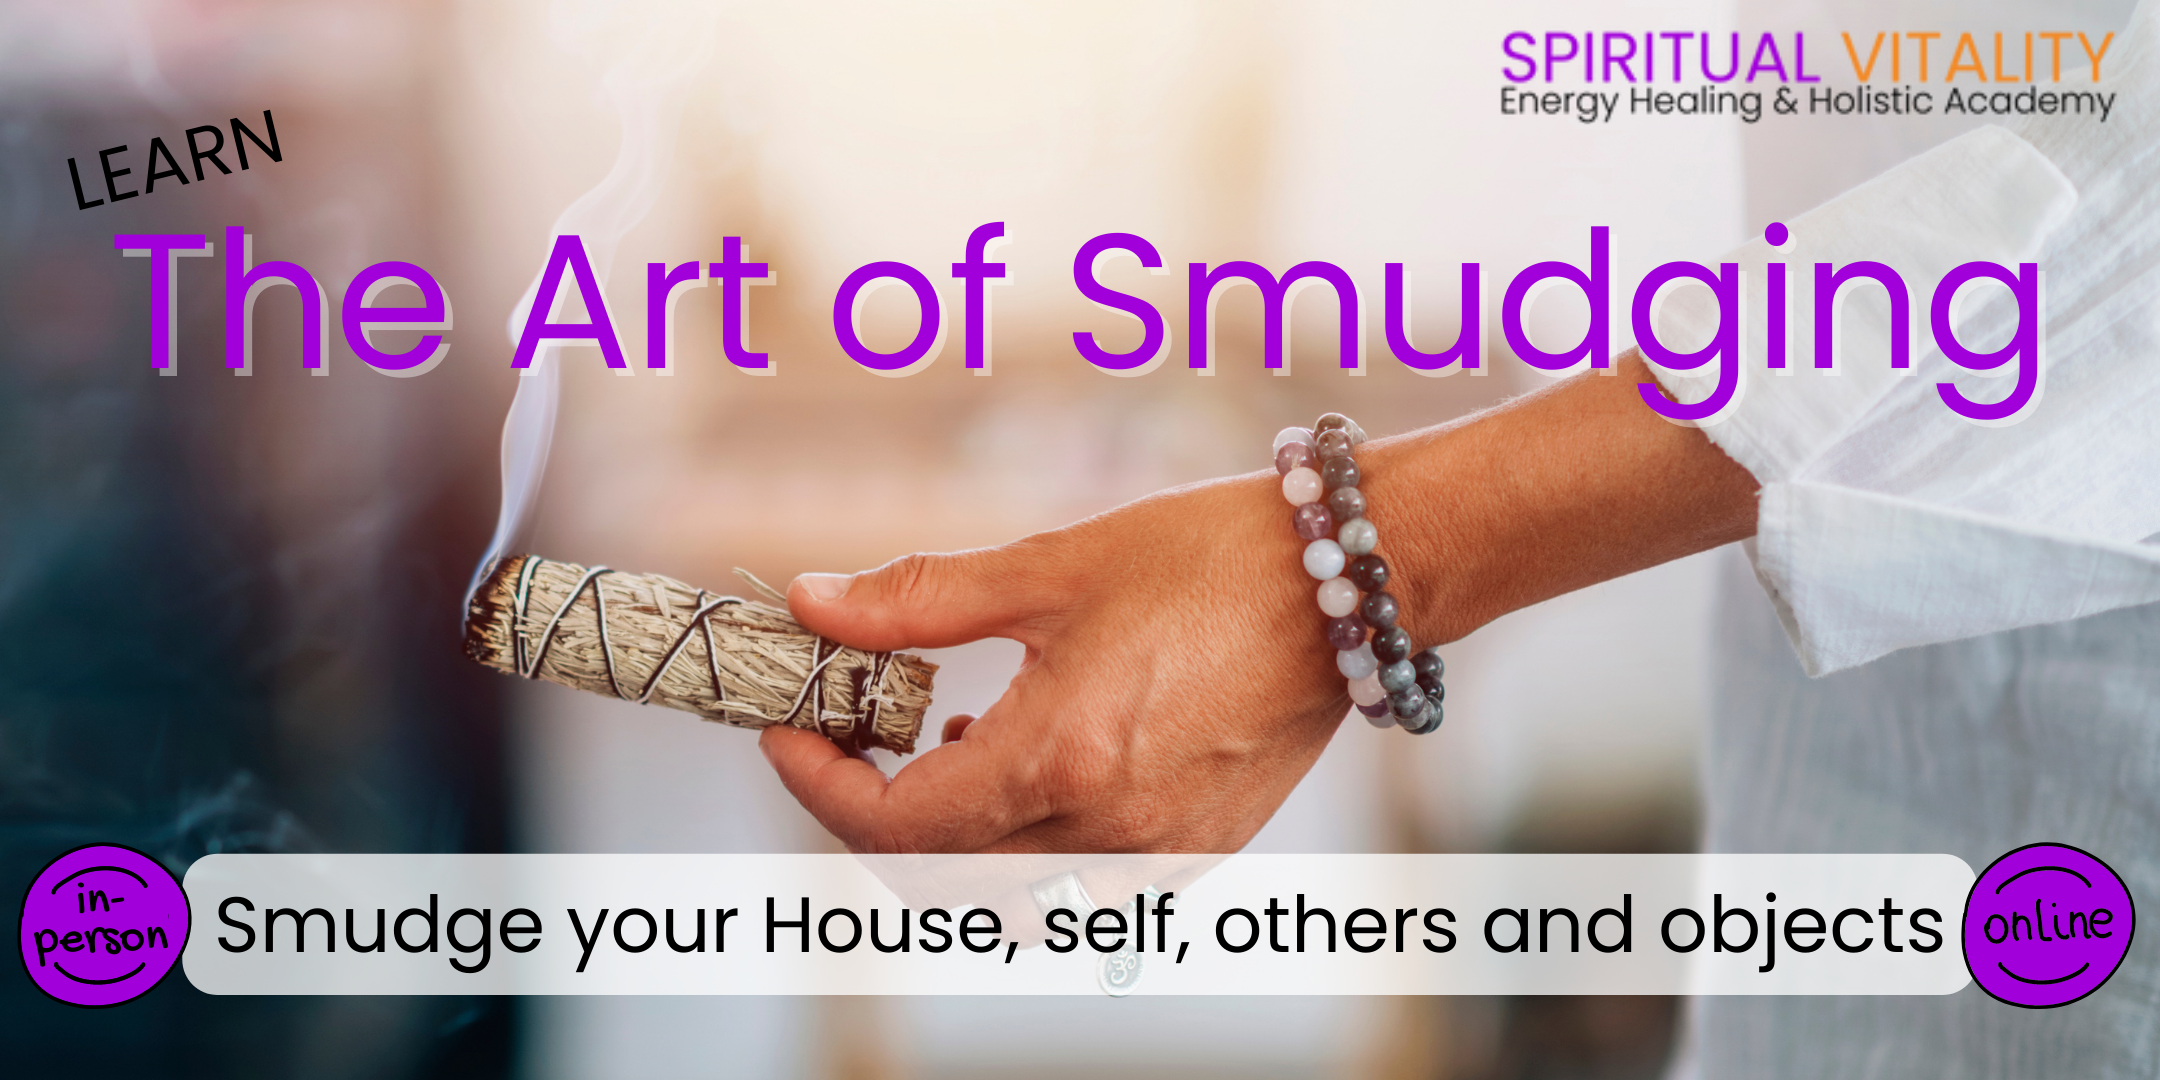 Learn The Art of Smudging